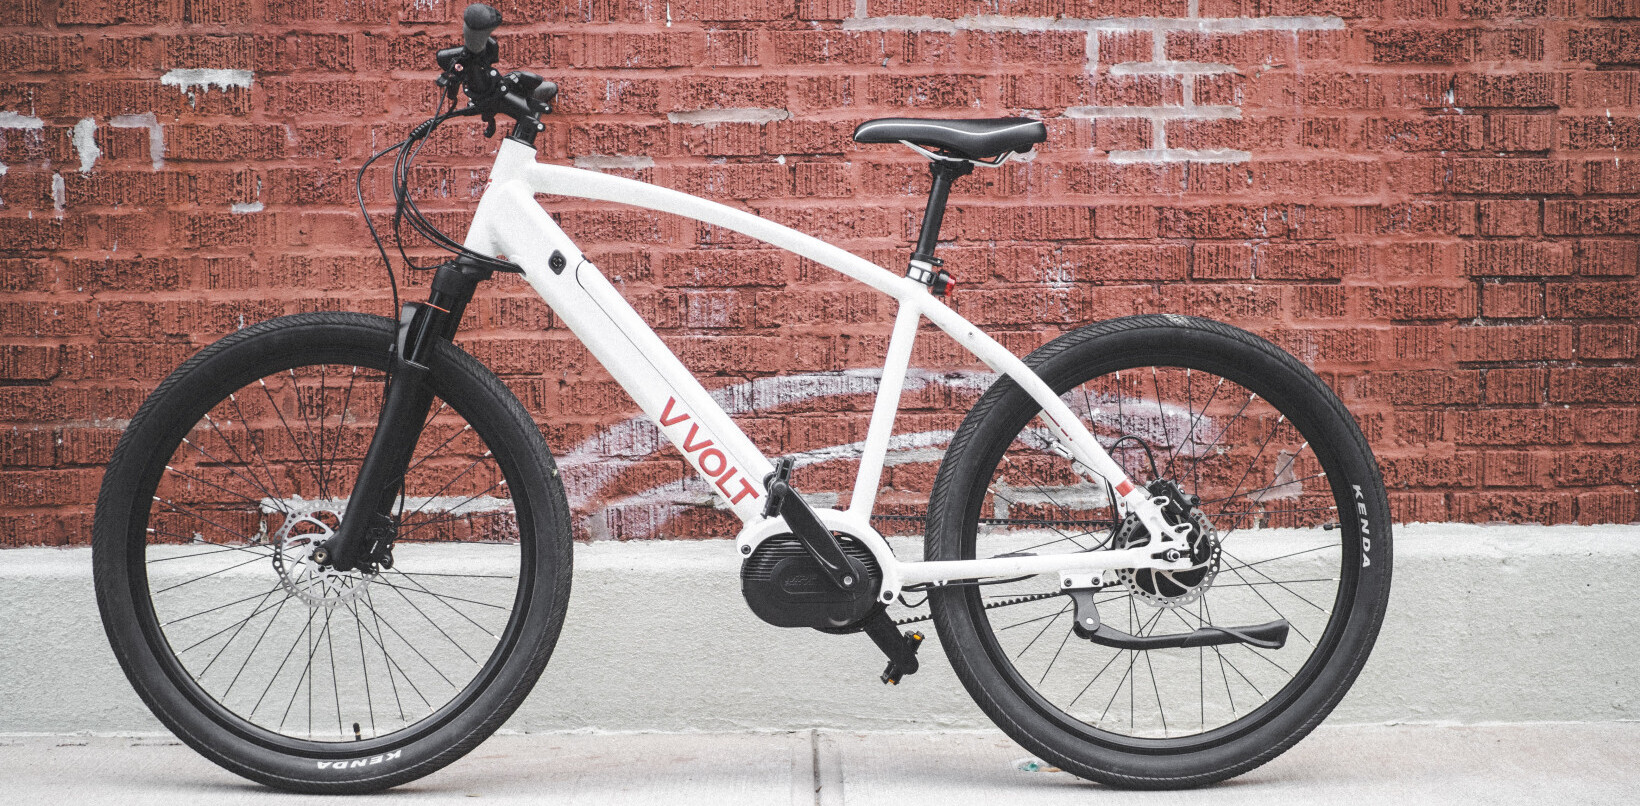 Vvolt Sirius review: This low-maintenance ebike is like riding on a cloud